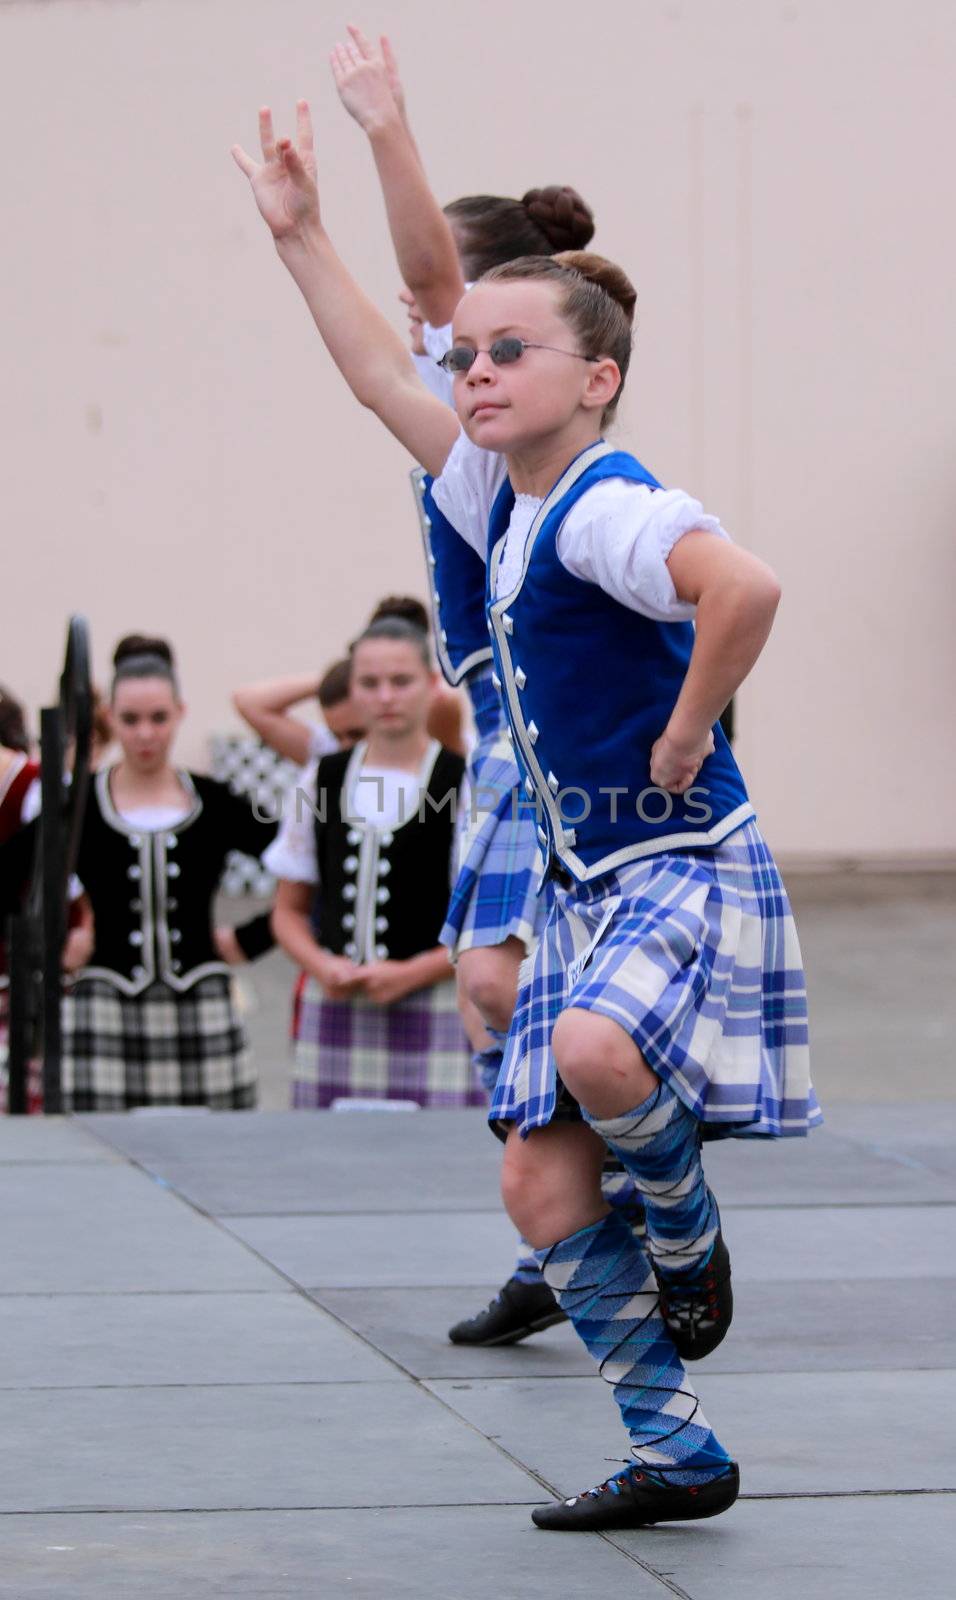 EDITORIAL ONLY VENTURA, CA, USA - October 11, 2009 - Girls performing at a dance competition at the Ventura Seaside Highland Games October 11, 2009 in Ventura, CA Where: Ventura, CA, USA